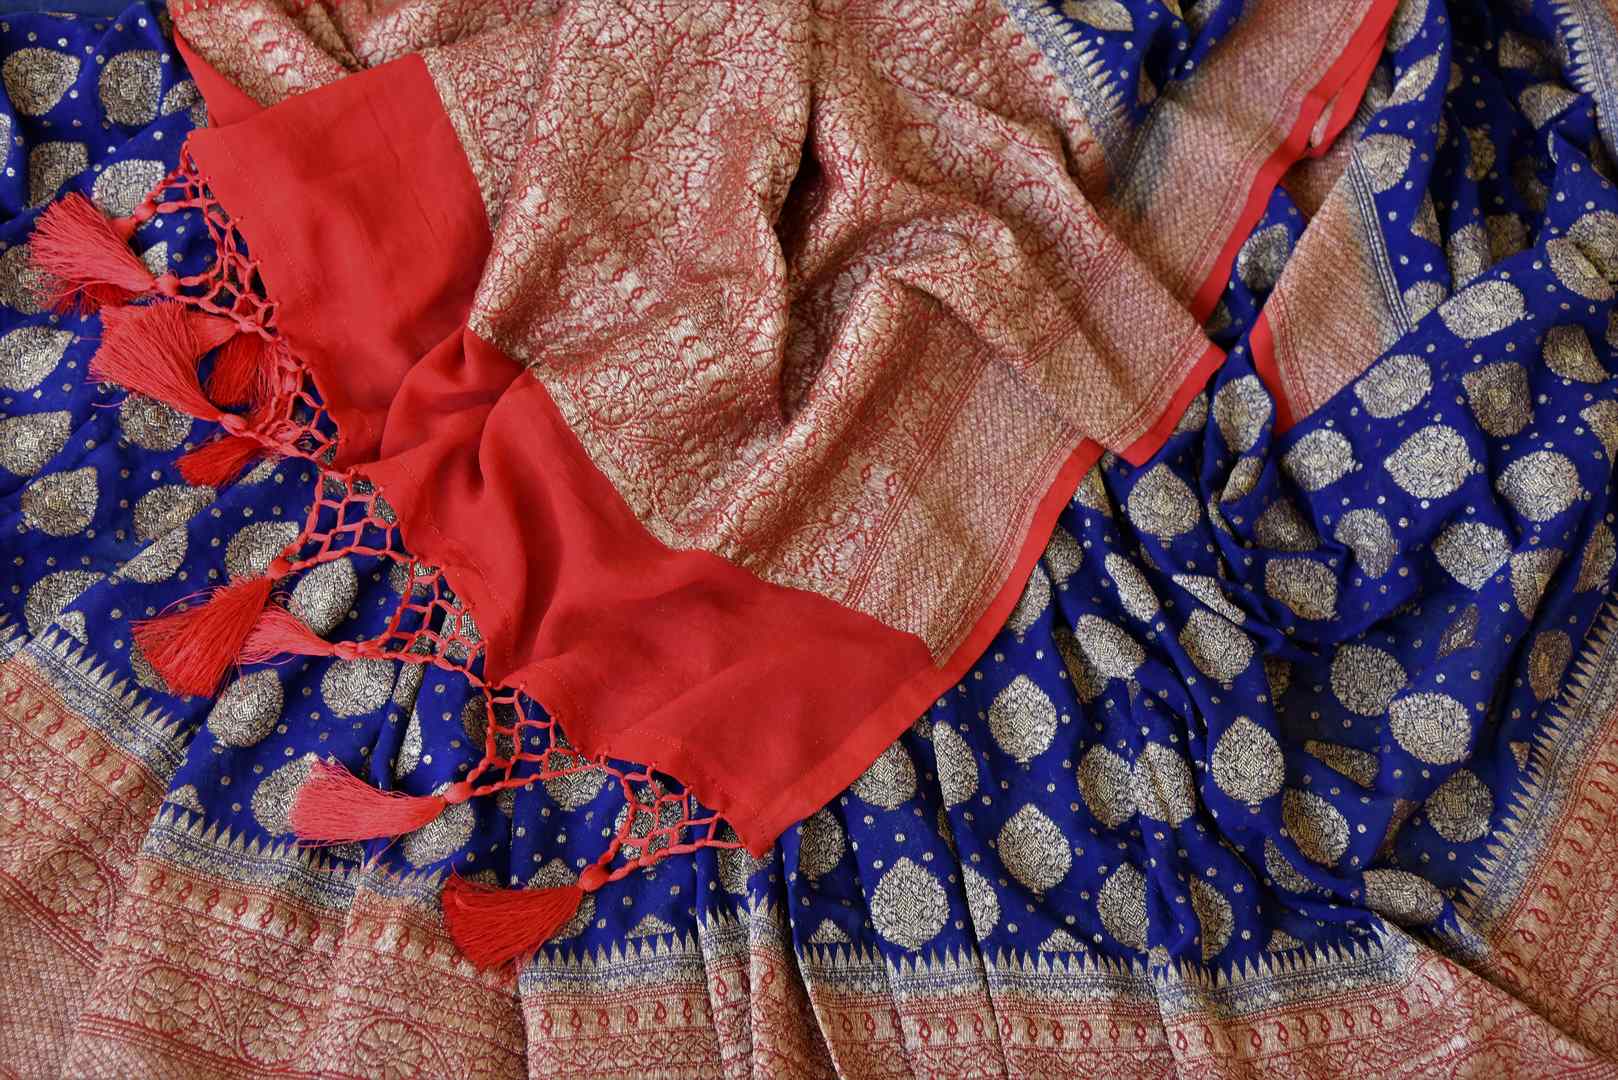 Buy ink blue georgette Banarasi sari online in USA with red antique zari border. Feel traditional on special occasions in beautiful Indian designer saris from Pure Elegance Indian fashion store in USA. Choose from a splendid variety of Banarasi sarees, pure handwoven saris. Buy online.-details